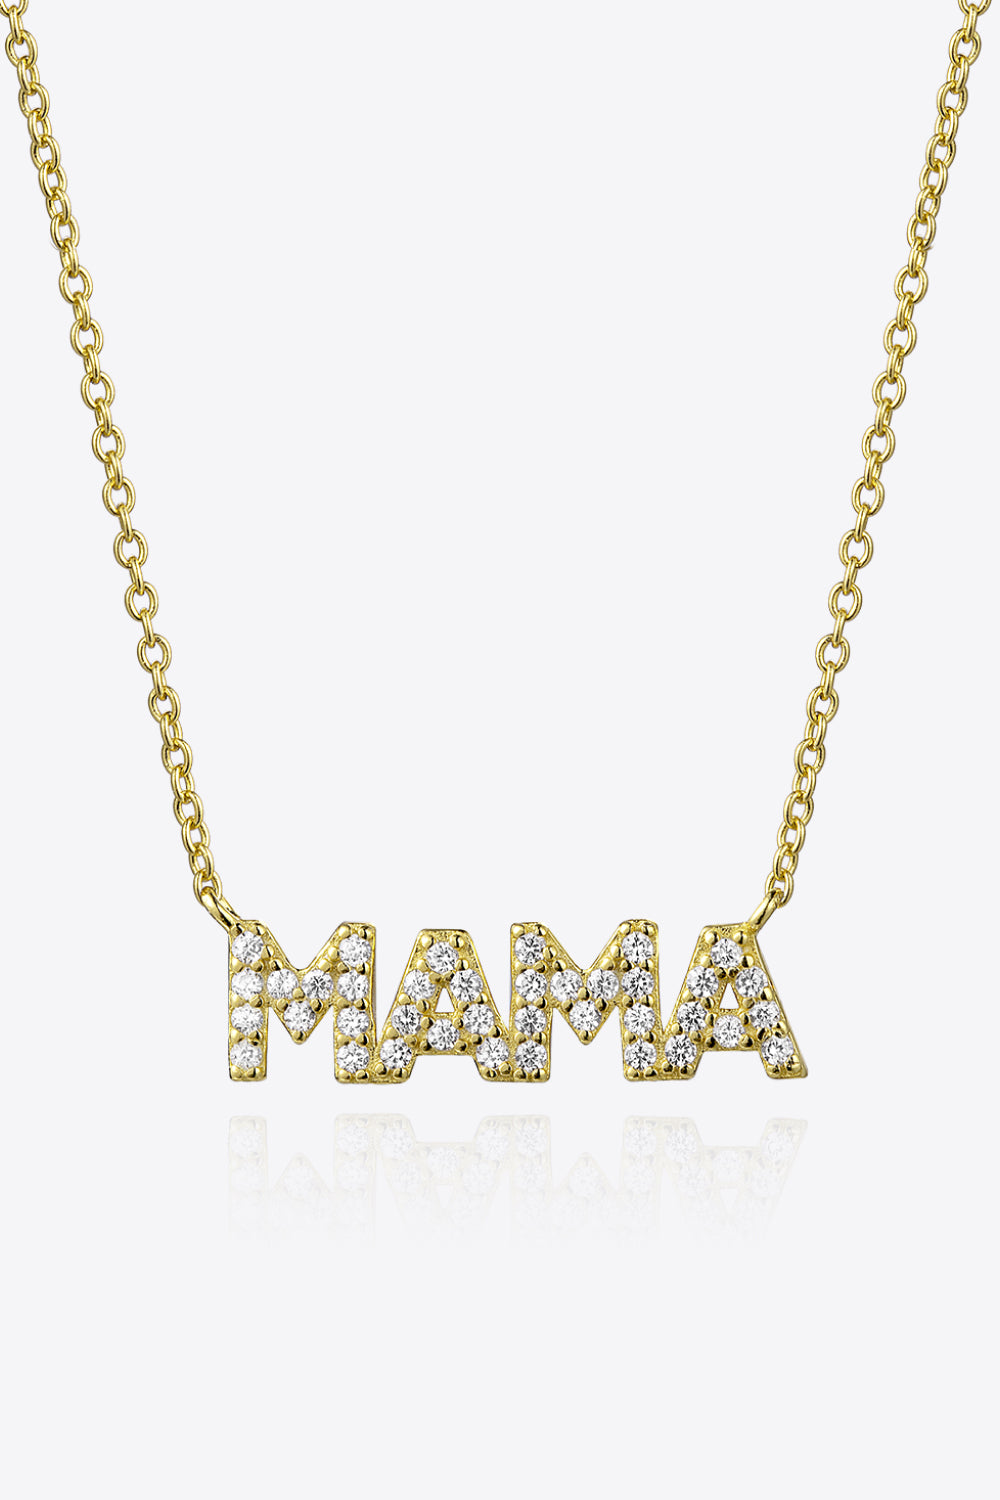 GOLD ONE SIZE - MAMA Zircon 925 Sterling Silver Necklace - necklace at TFC&H Co.